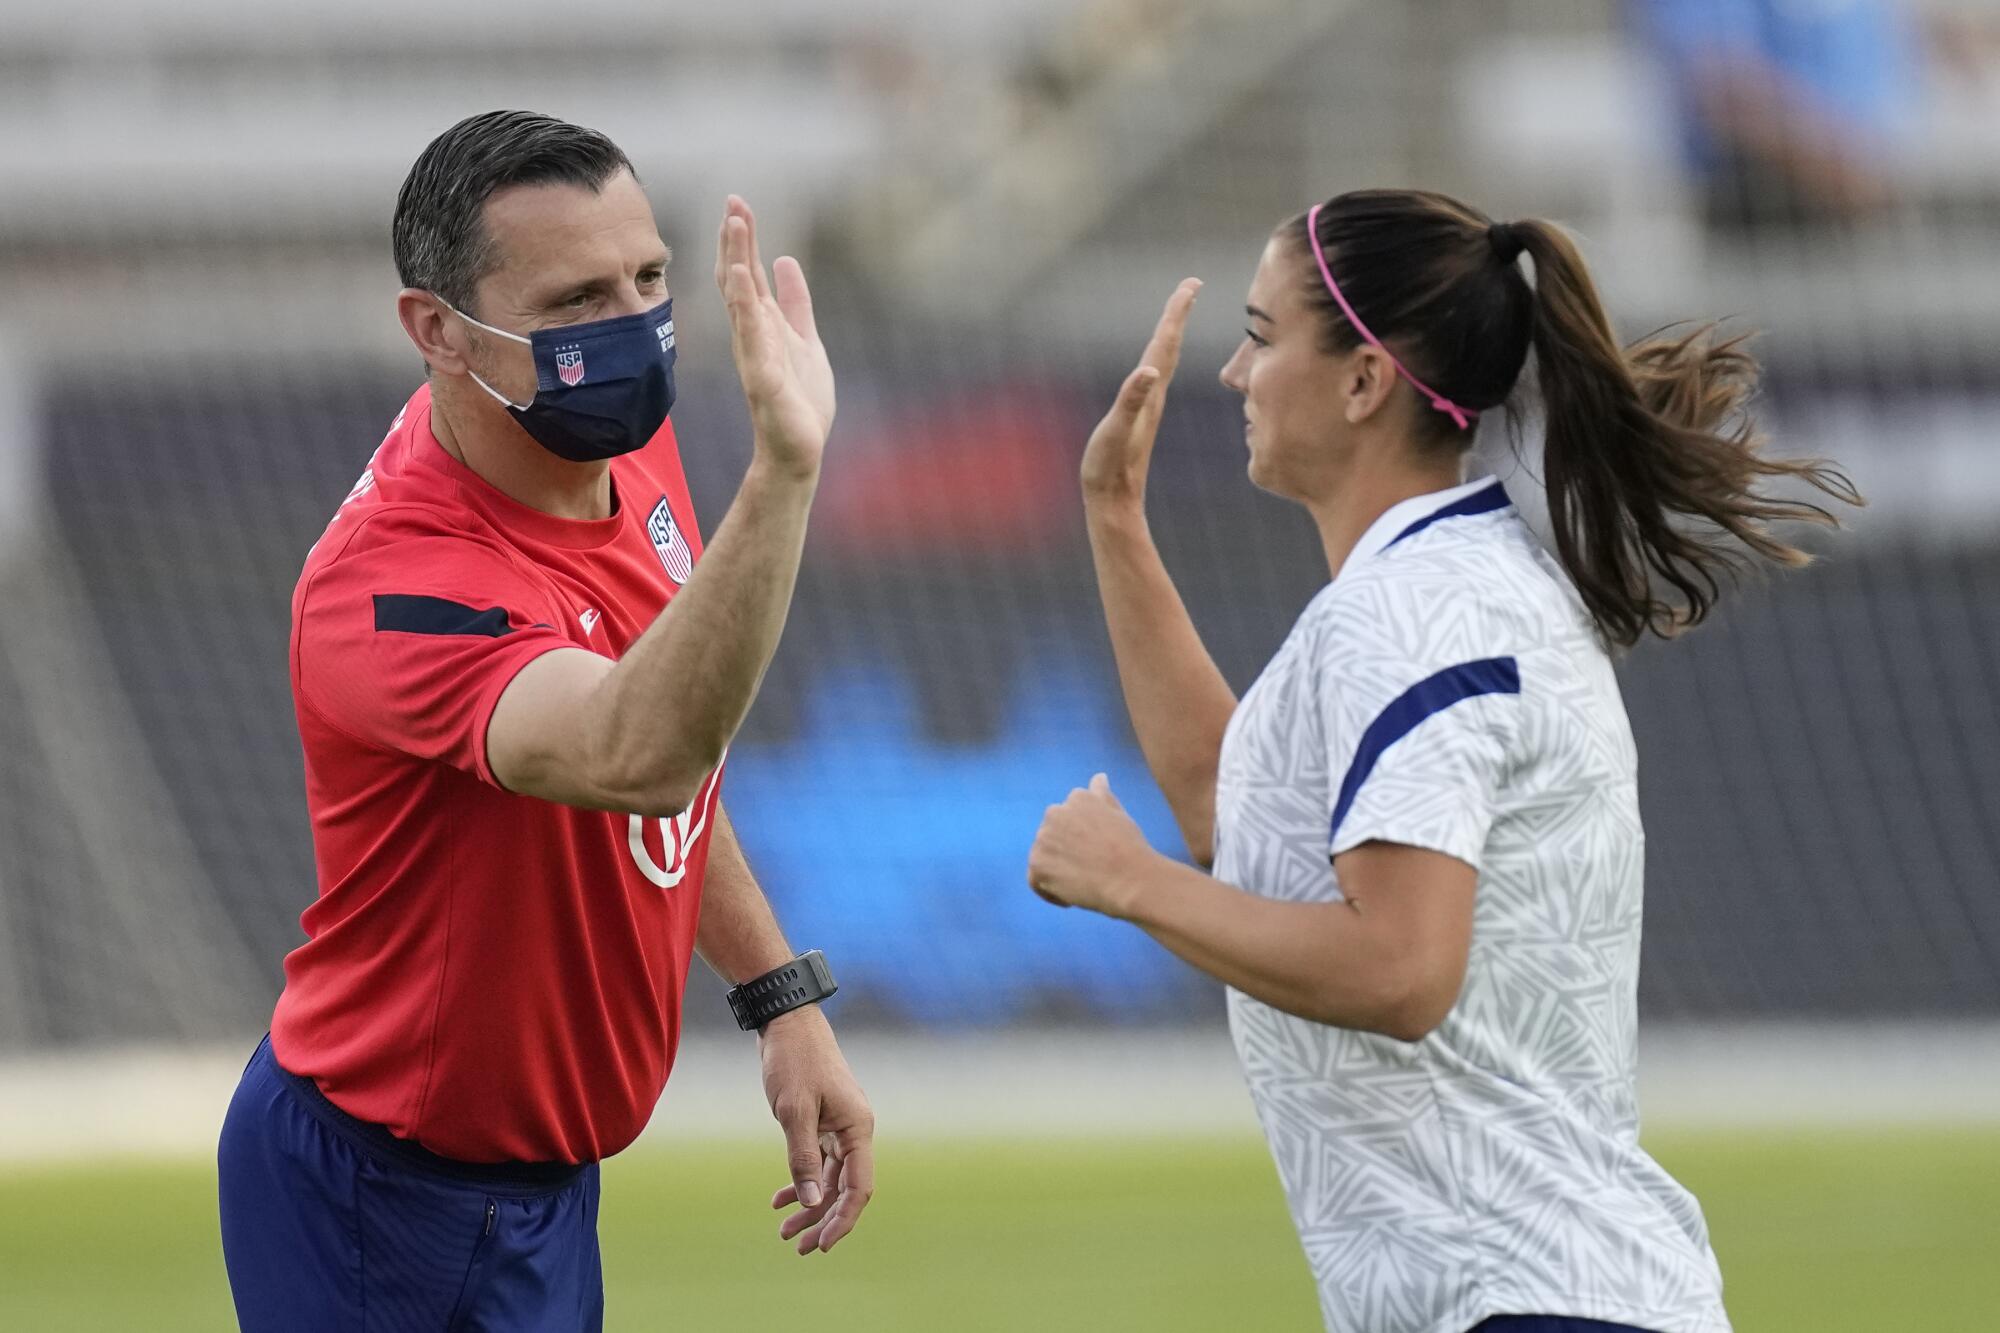 A look at top candidates to be the next U.S. women's soccer coach